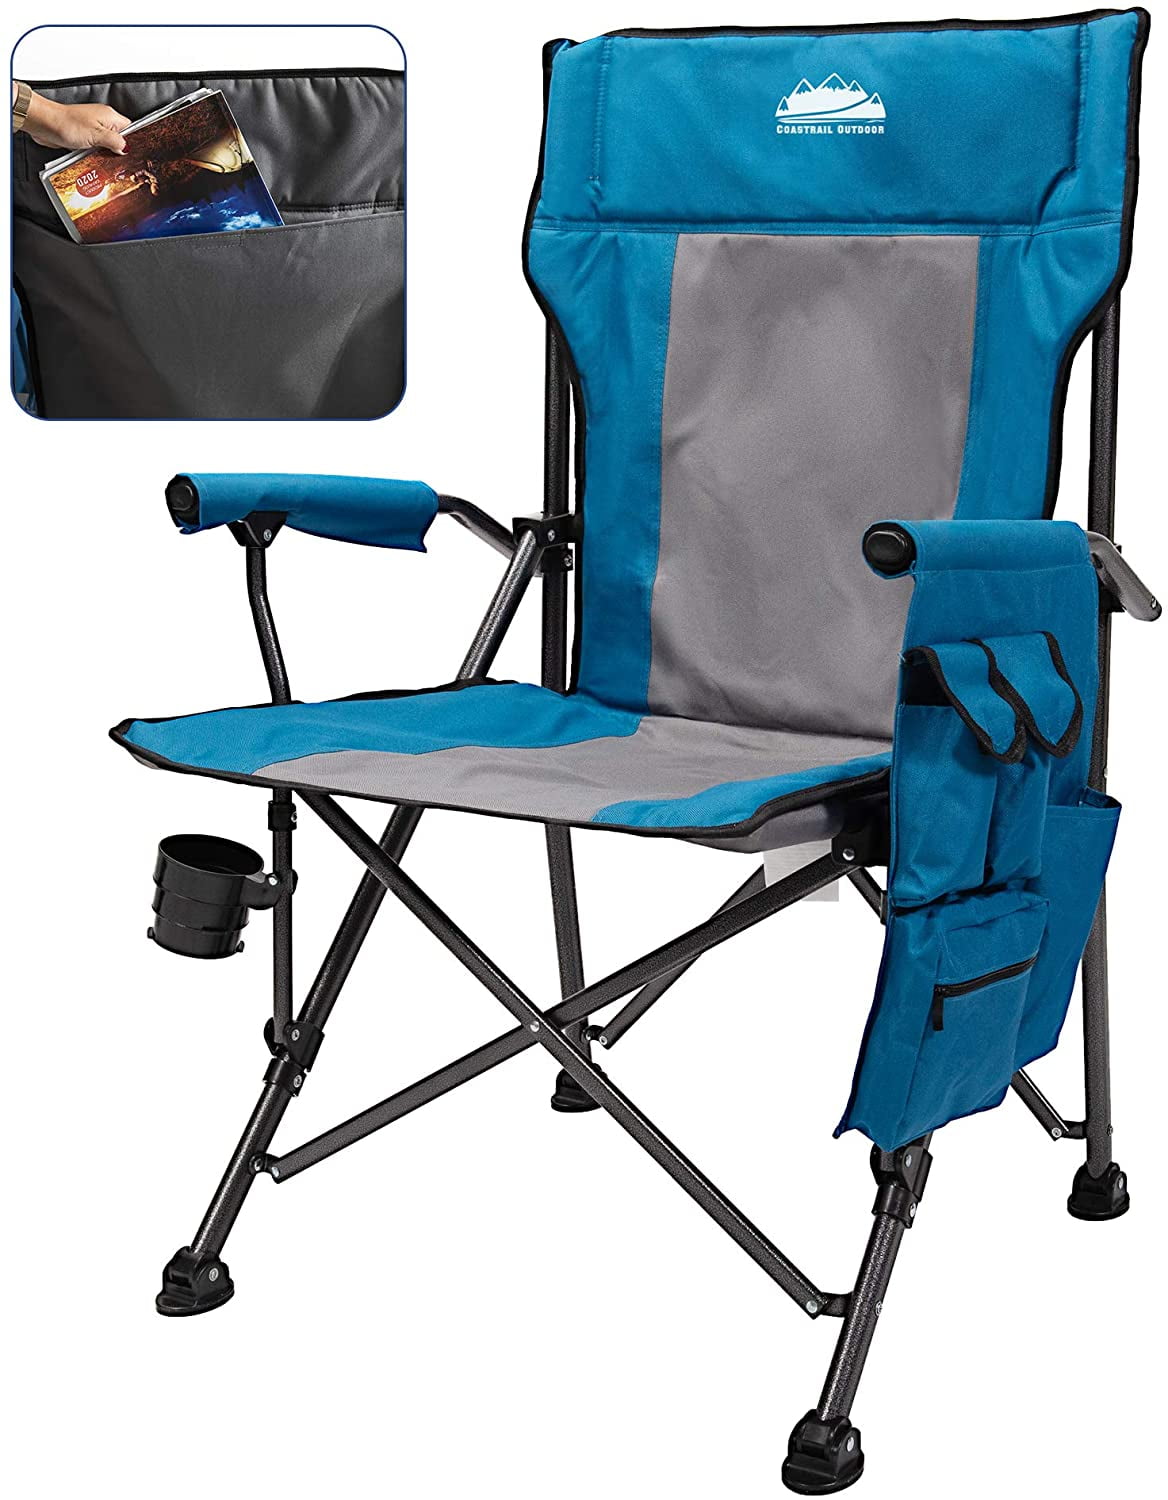 Blue Gray Coastrail Outdoor Reclining Camping Chair Adjustable 3 Position Heavy Duty Steel 300 LBS Capacity for Adult Lounge with Cup Holder & Storage Folding Lawn Chair Outdoor RV Patio 